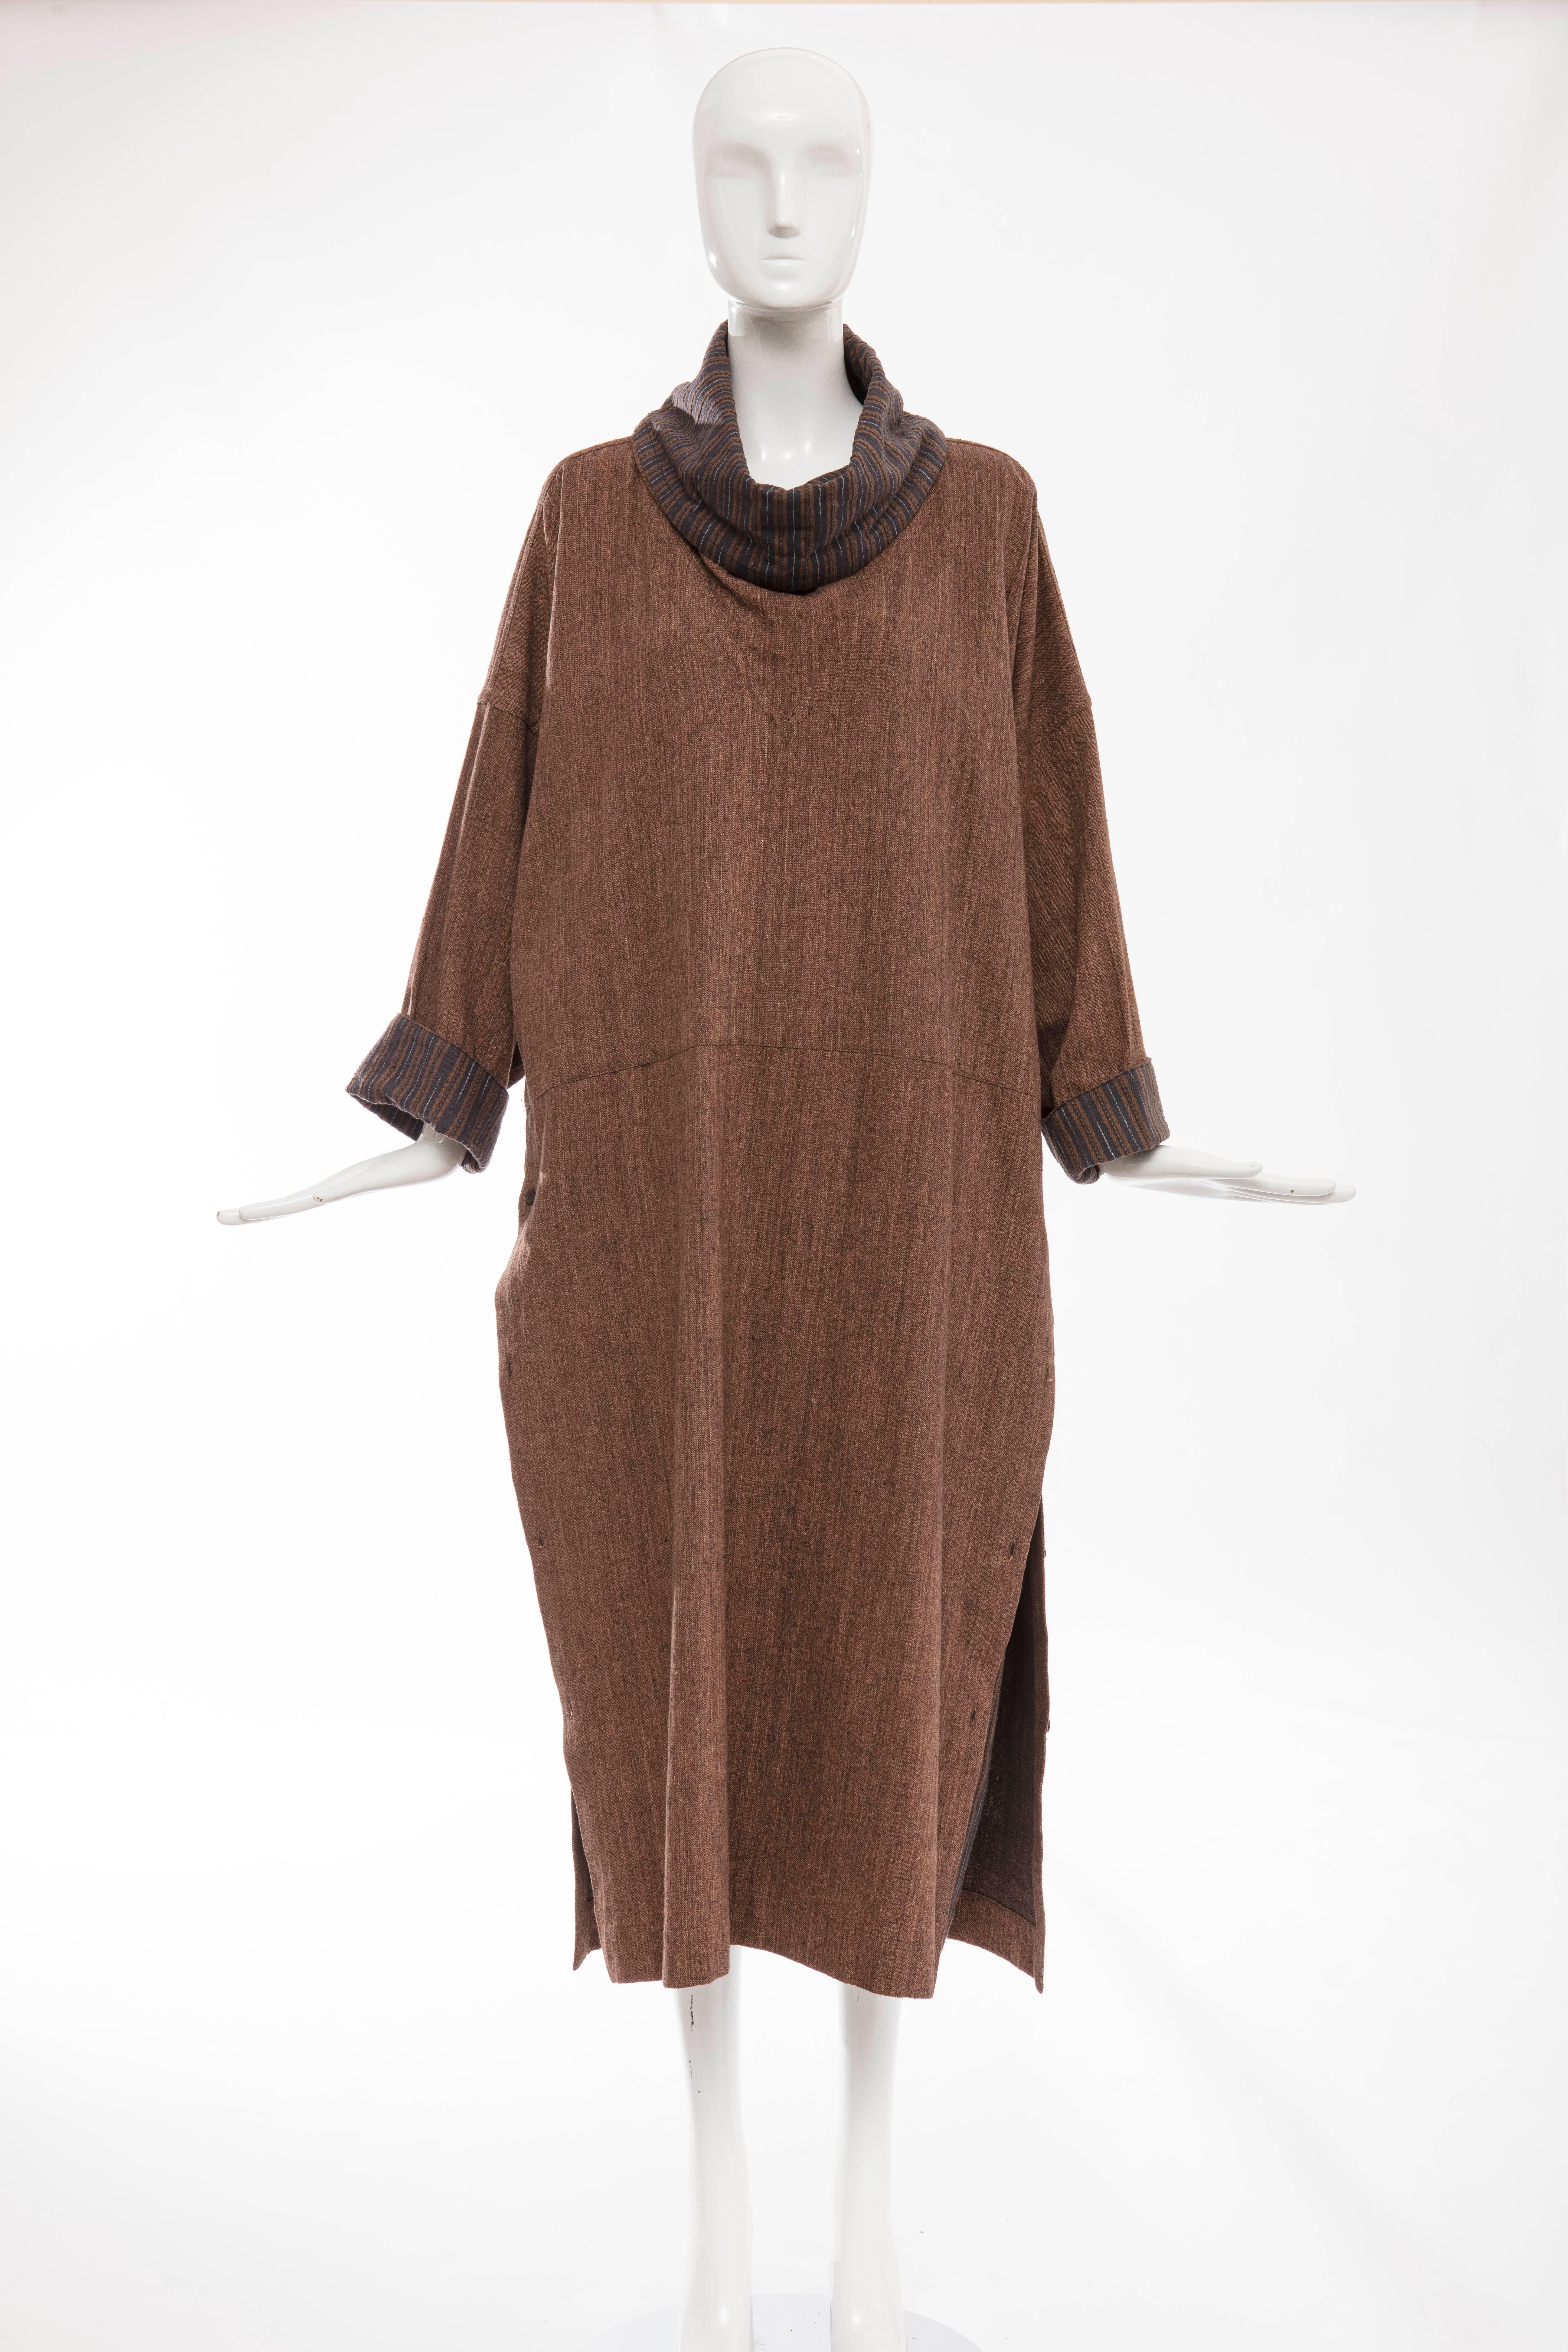 Issey Miyake Plantation, circa 1980's  woven cotton double layered dress with brown blue striped cowl neck and cuffs, two front pockets and double side wooden button closure.

Japan: Medium

Bust 56", Waist 46", Hips 52" Length